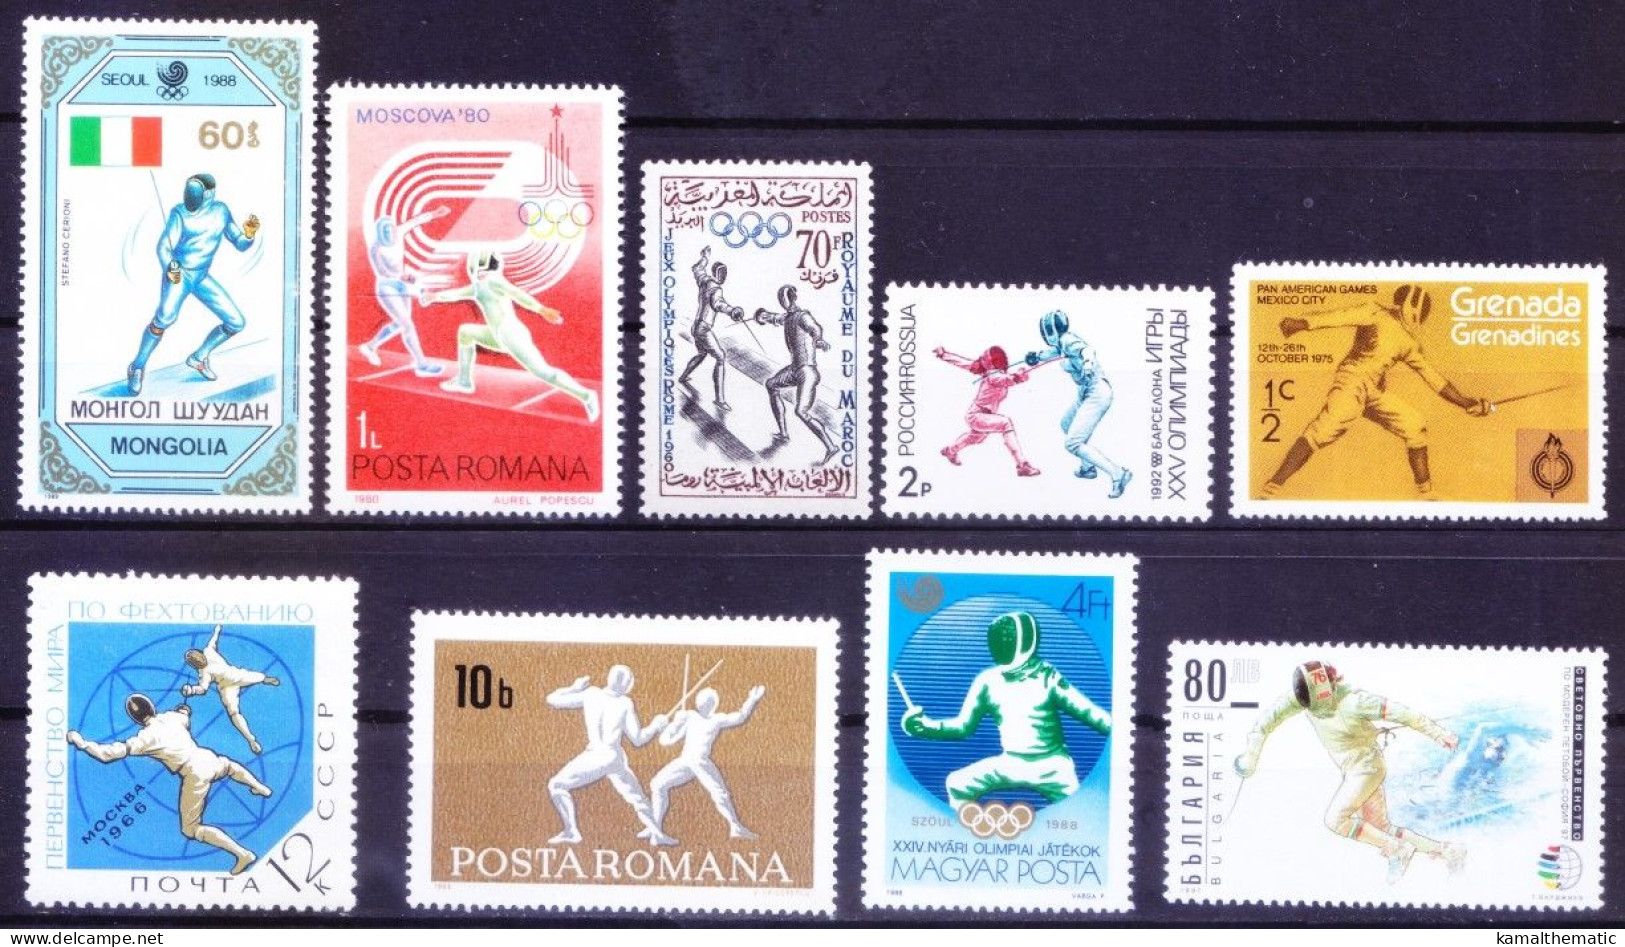 Fencing, Sword Fighting, Sports, Olympic, 9 Different MNH Stamps - Schermen